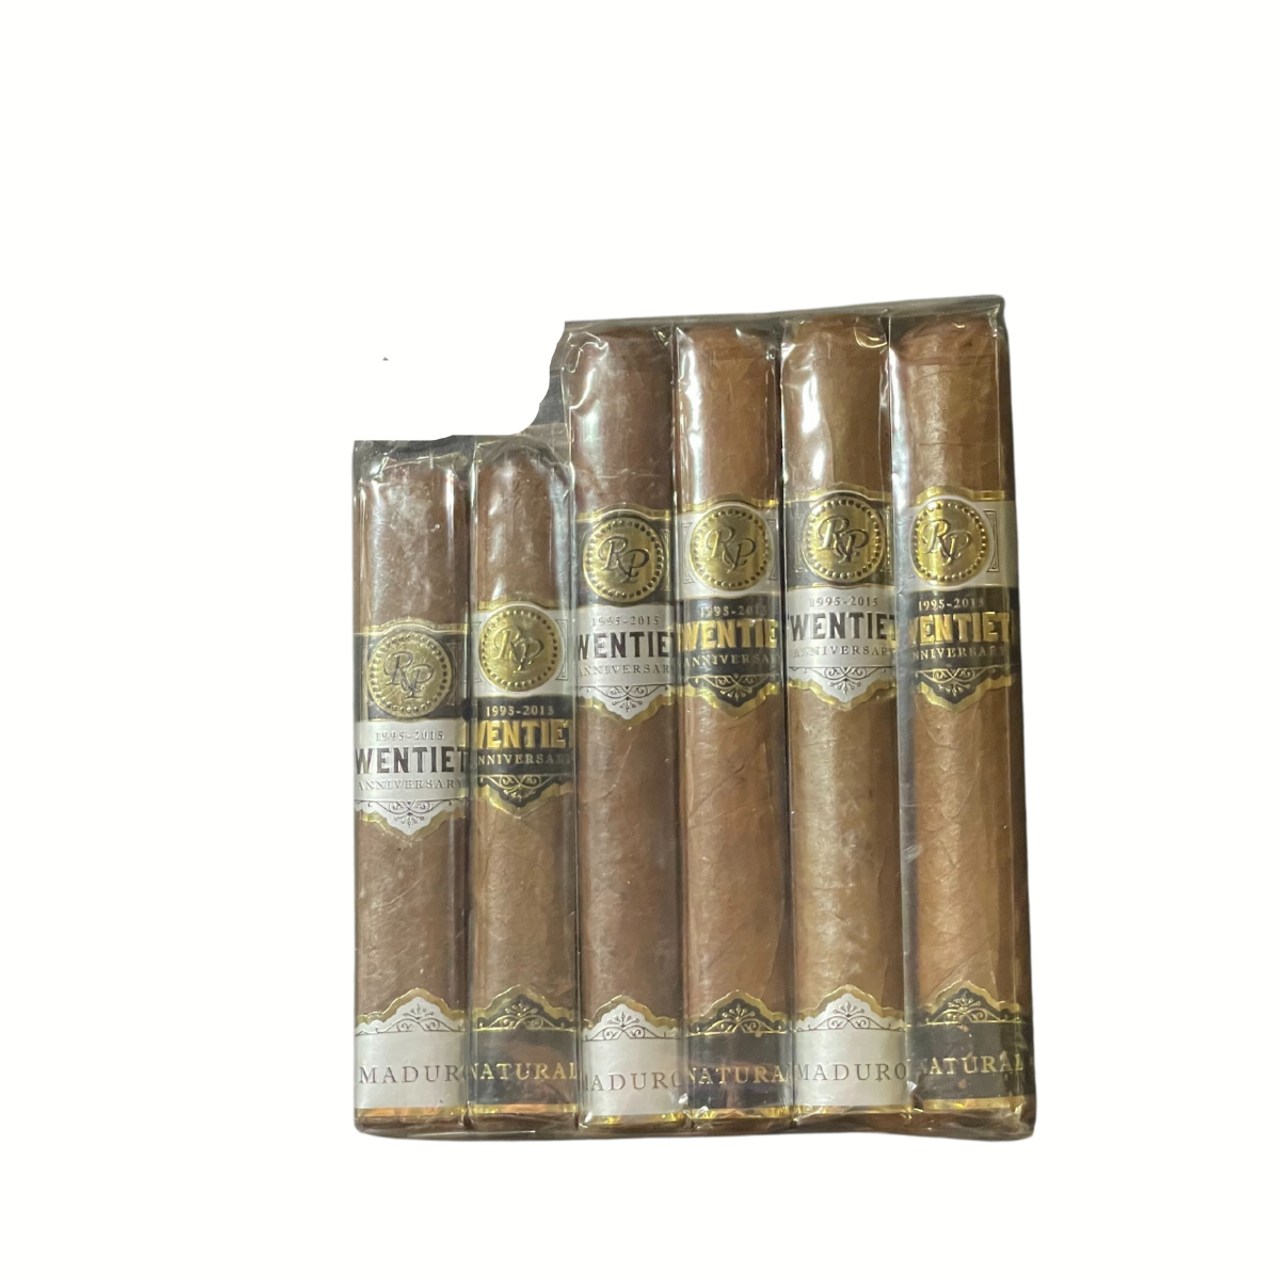 Rocky Patel Twentieth 6 Pack Attack from cigarsamplers.com features Great Cigars & FREE shipping!